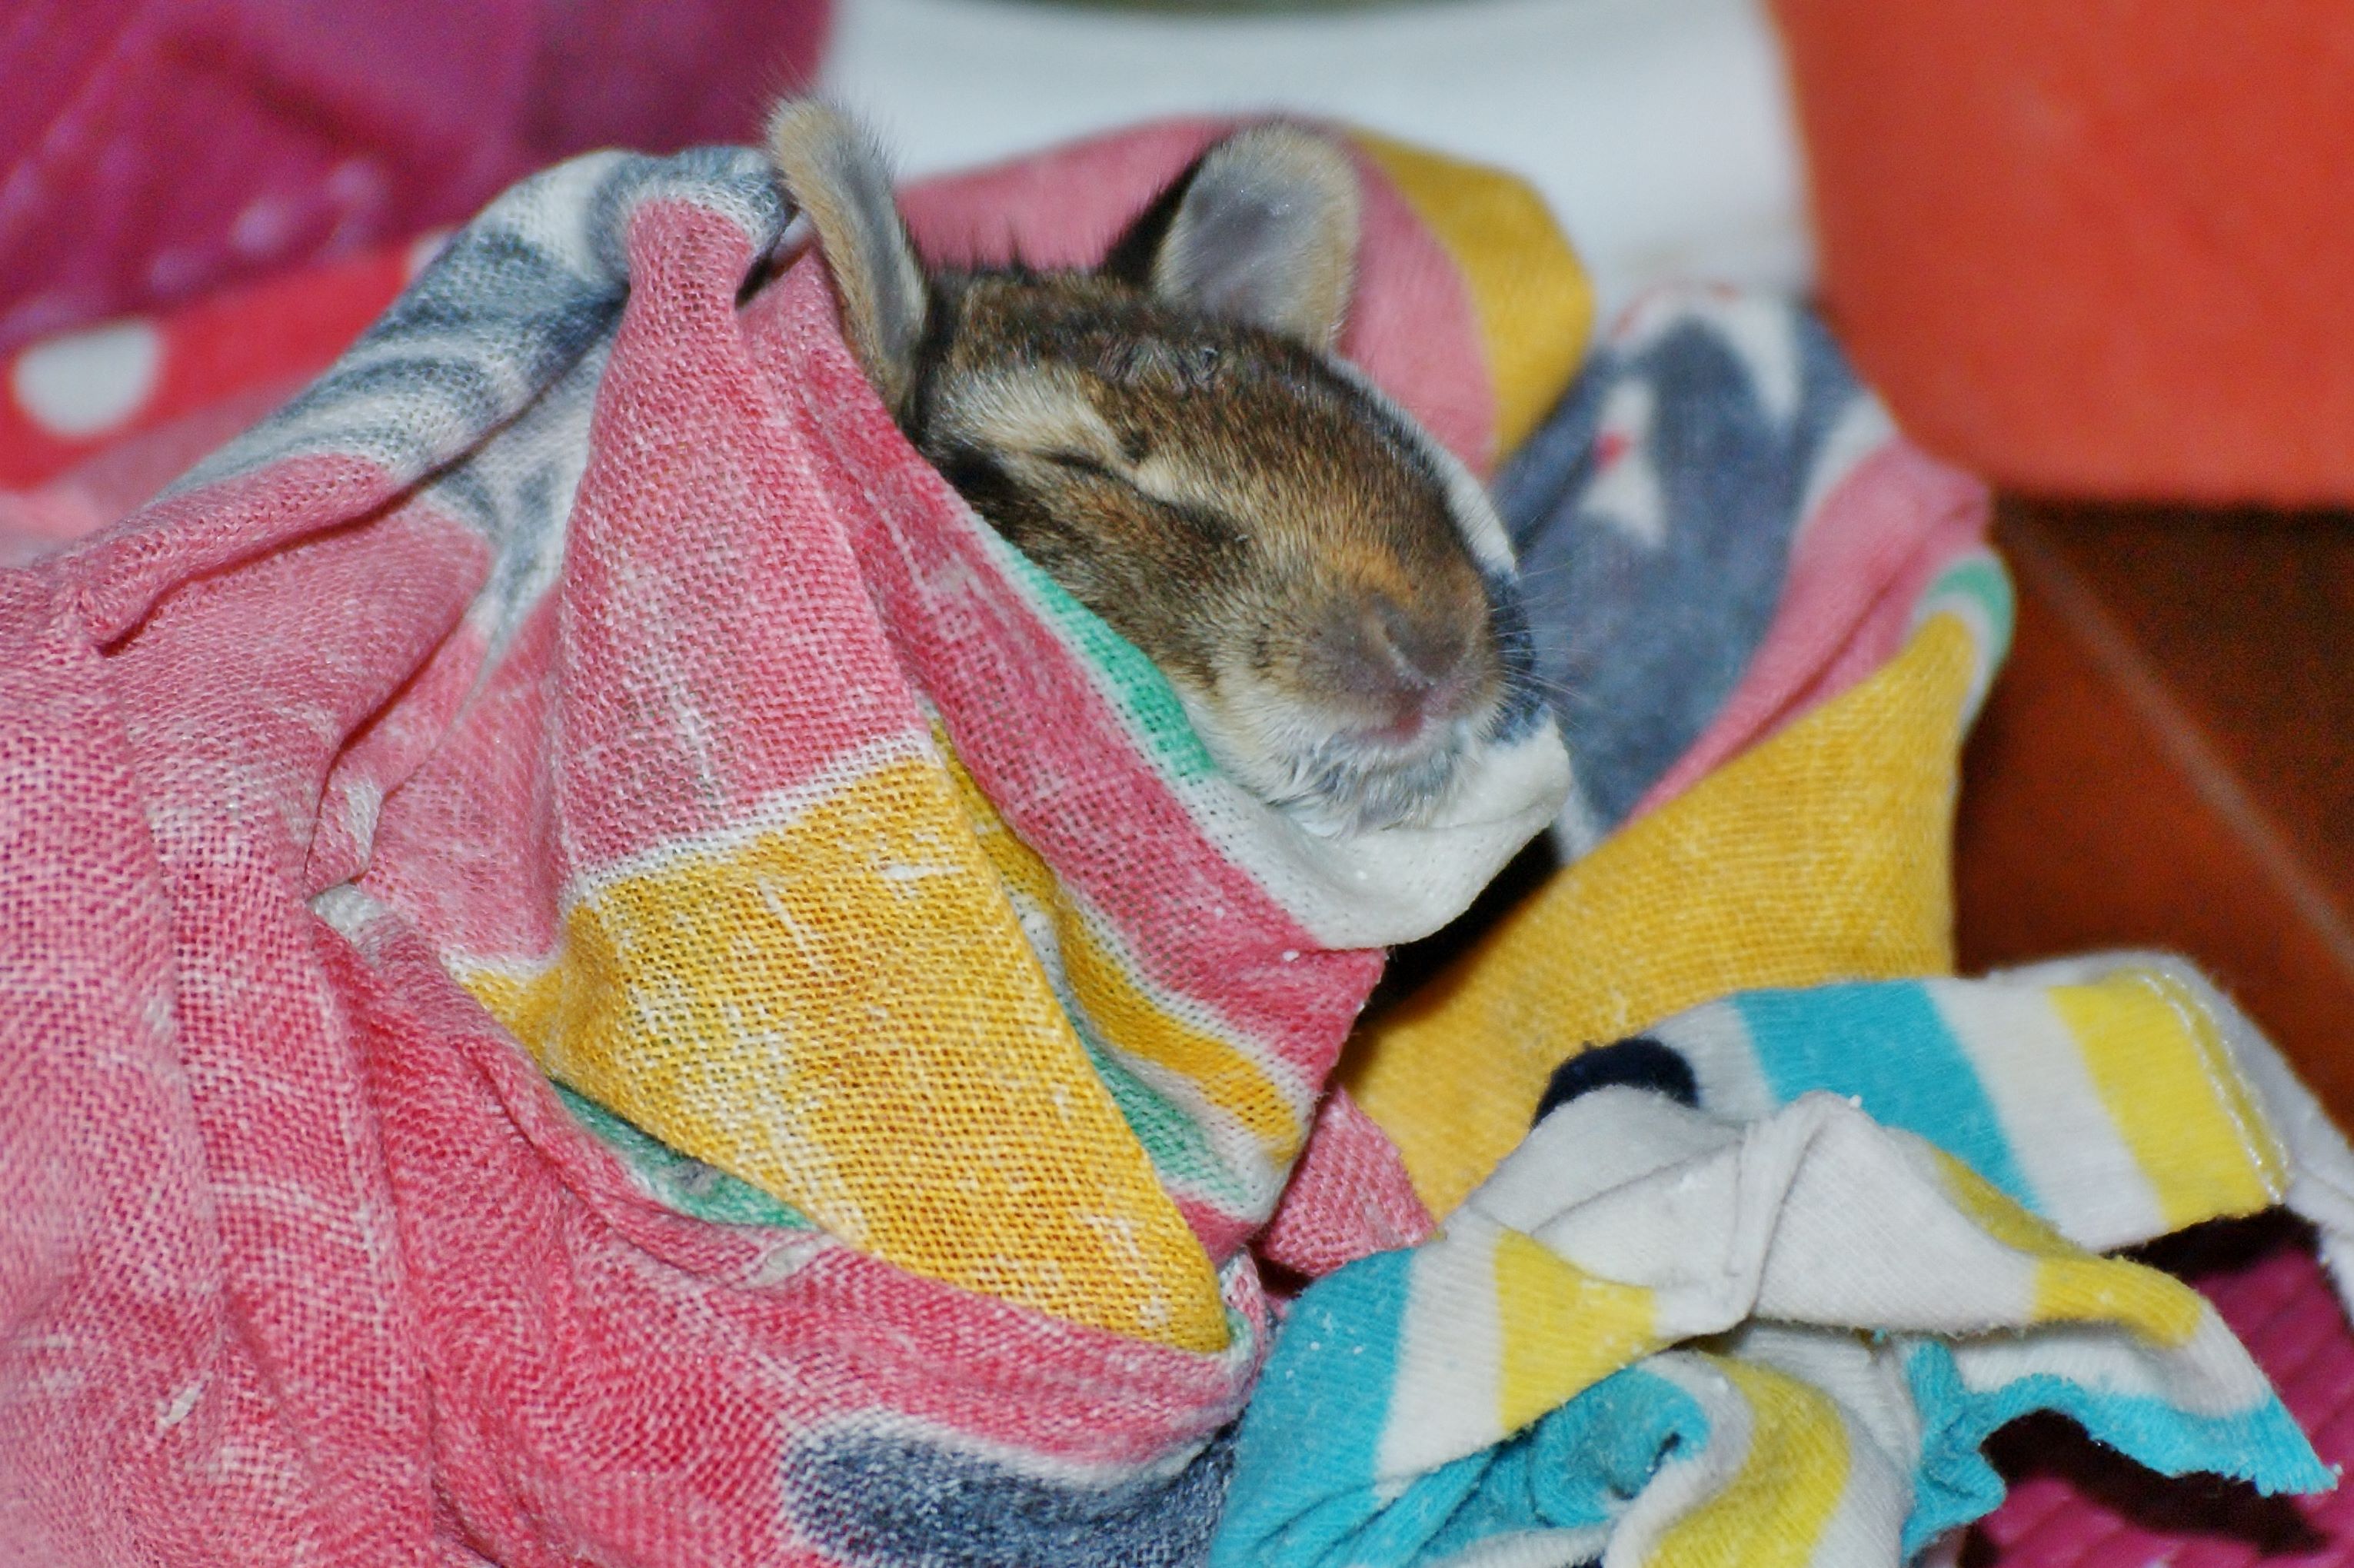 Wildlife Rehabilitator - Juvenile Eastern Cottontail Rabbit wrapped in dish towel at feeding time